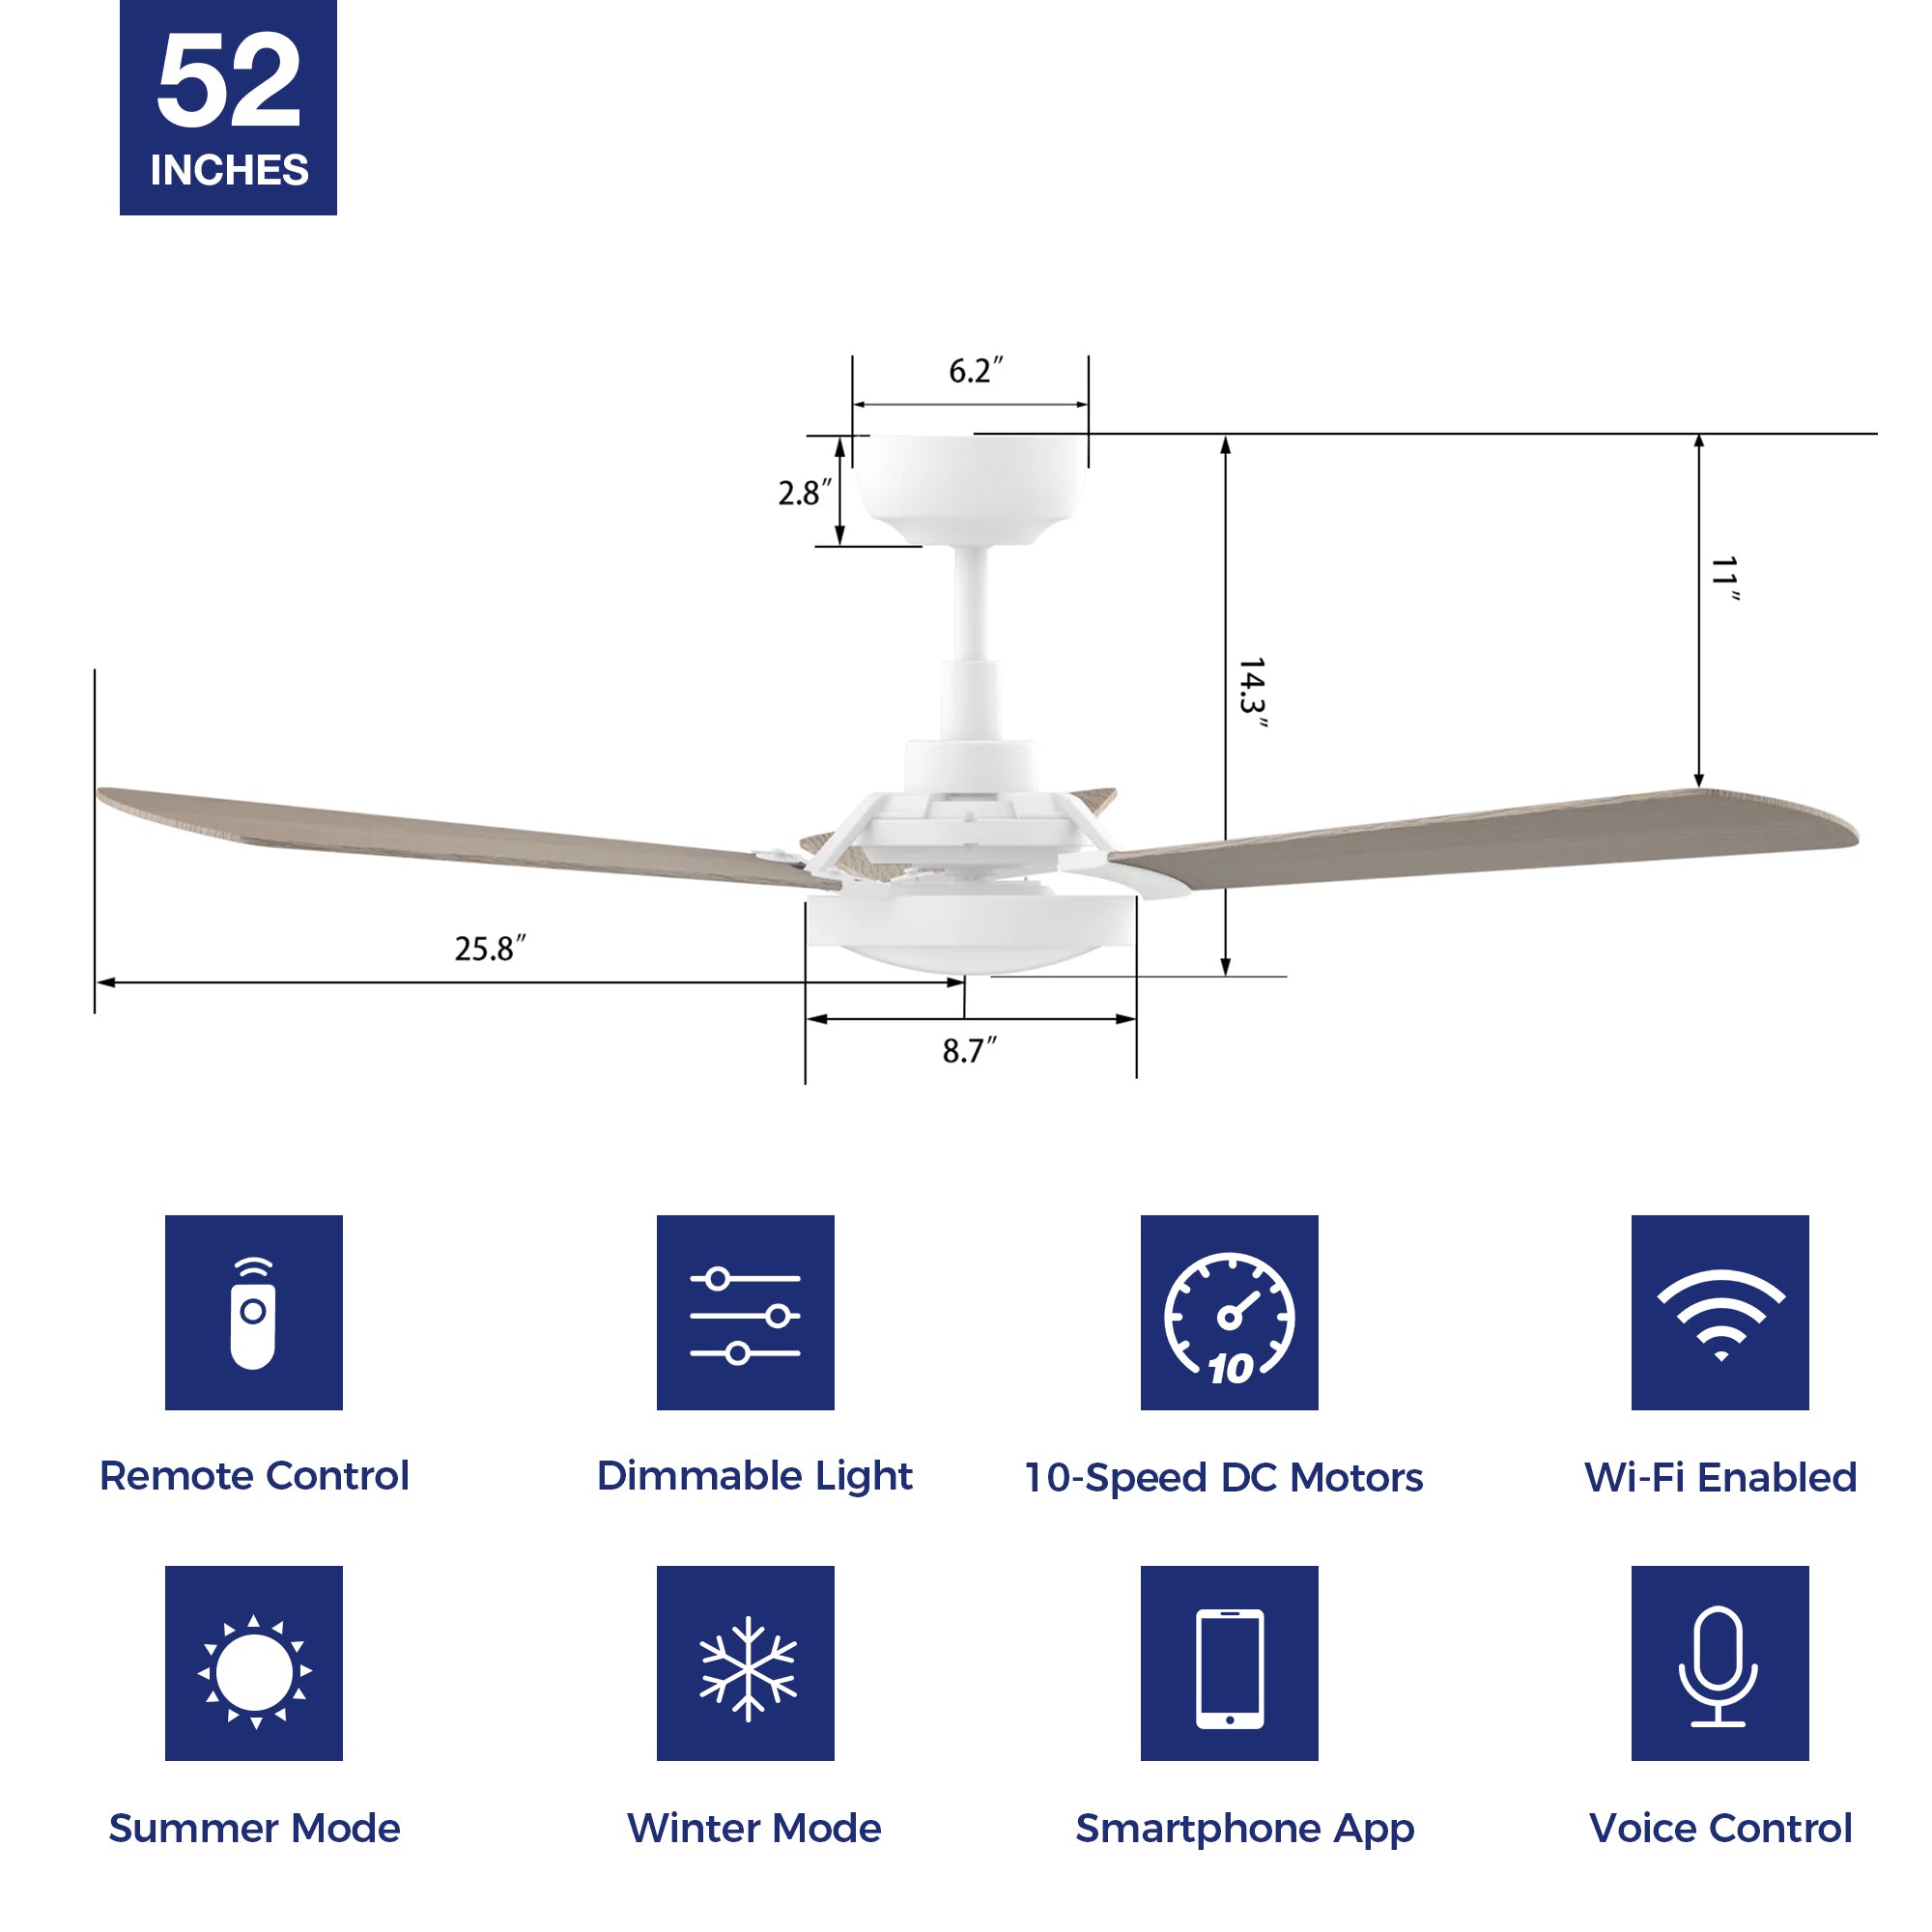 This smart ceiling fan is a simplicity designing with White finish, use elegant Plywood blades, Glass shade and has an integrated 4000K LED daylight. The fan features Remote control, Wi-Fi apps, Siri Shortcut and Voice control technology (compatible with Amazon Alexa and Google Home Assistant ) to set fan preferences.